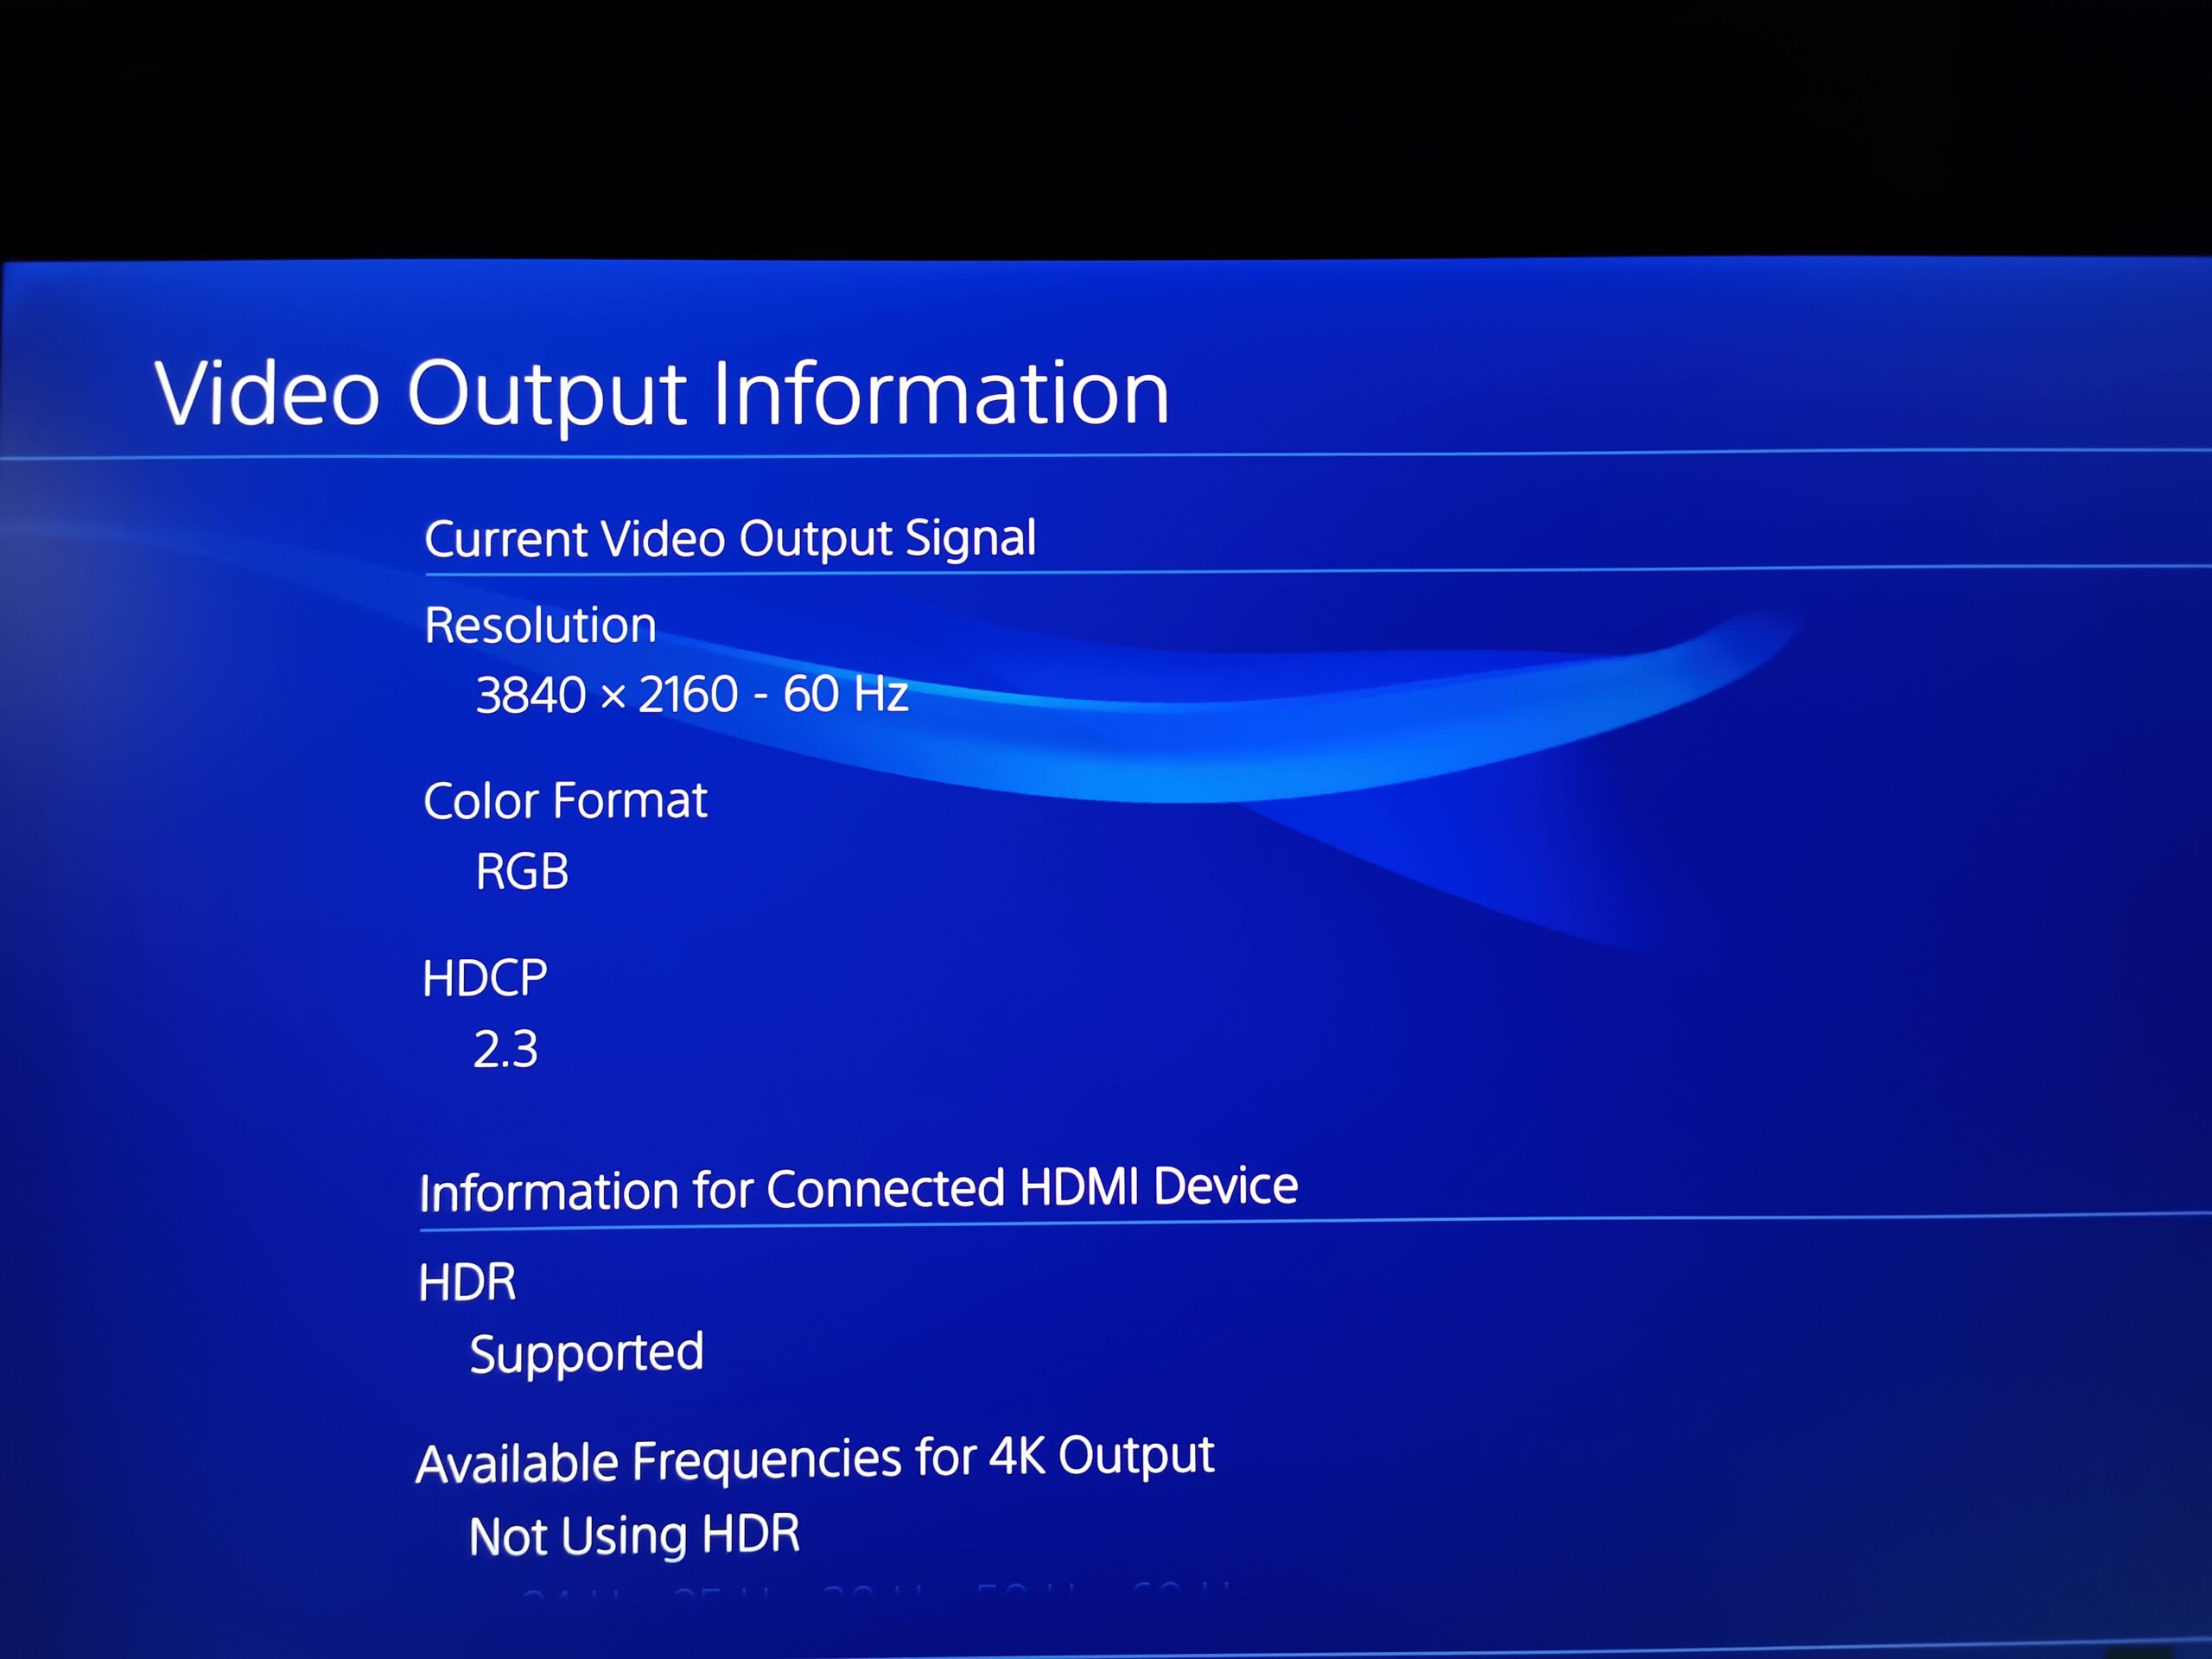 PS4 Firmware Update Will Bring HDR Support to All PS4s - GameSpot